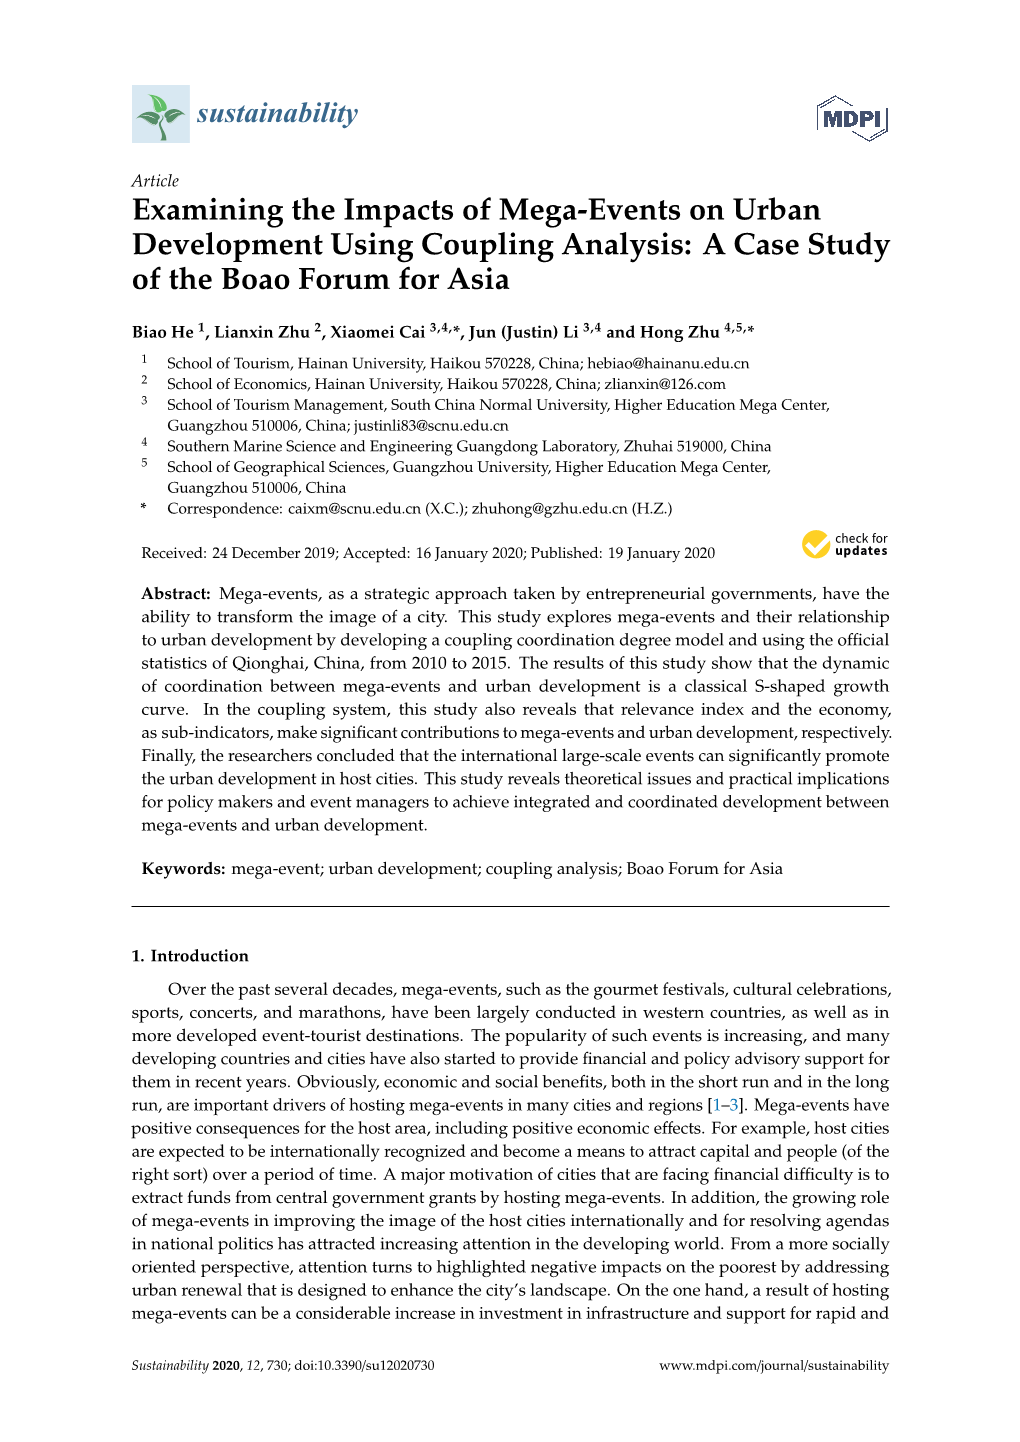 Examining the Impacts of Mega-Events on Urban Development Using Coupling Analysis: a Case Study of the Boao Forum for Asia